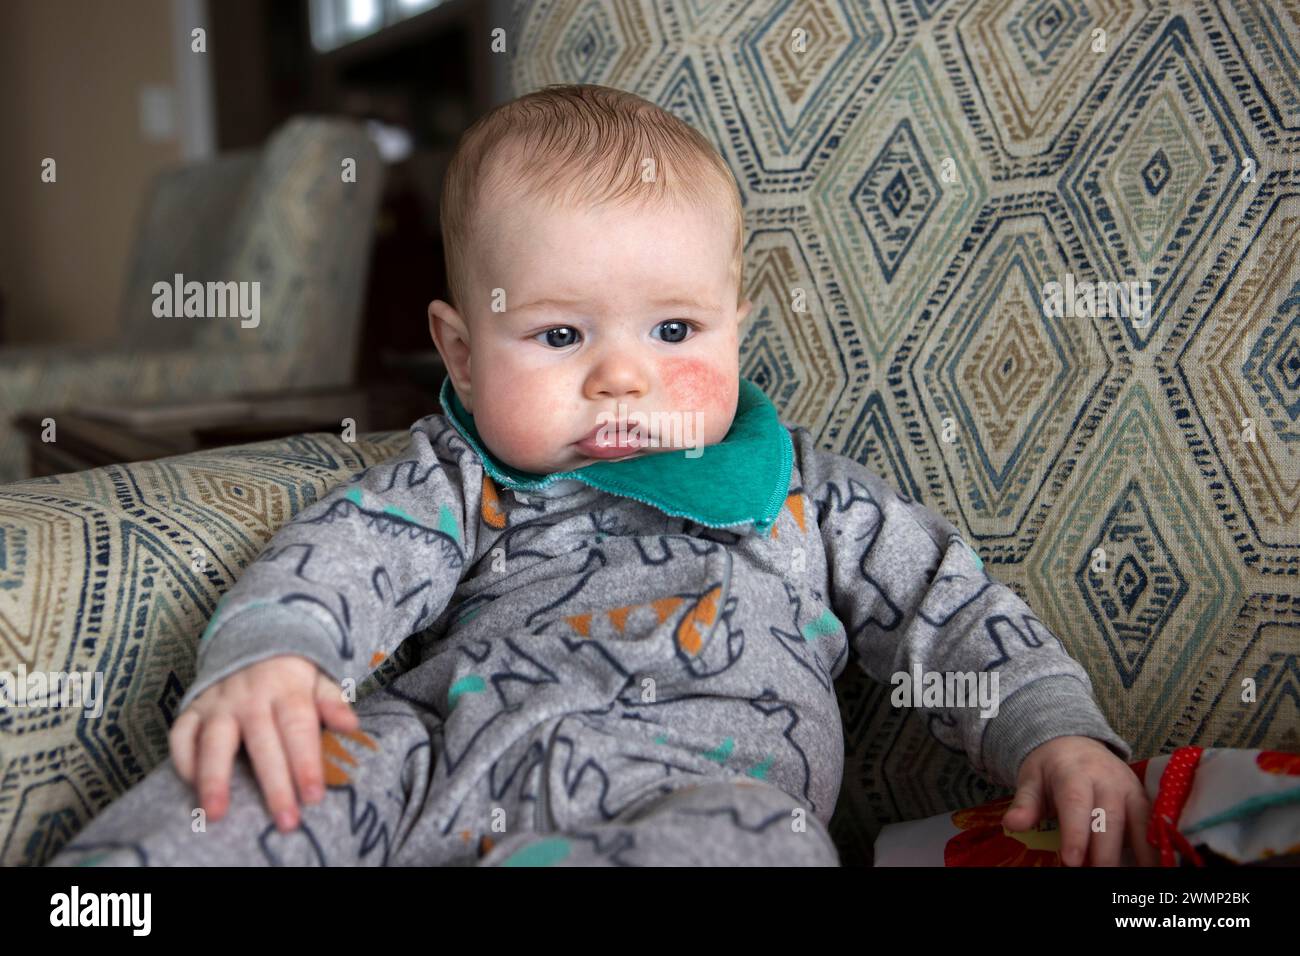 Four month old baby boy propped up in a chair. Stock Photo